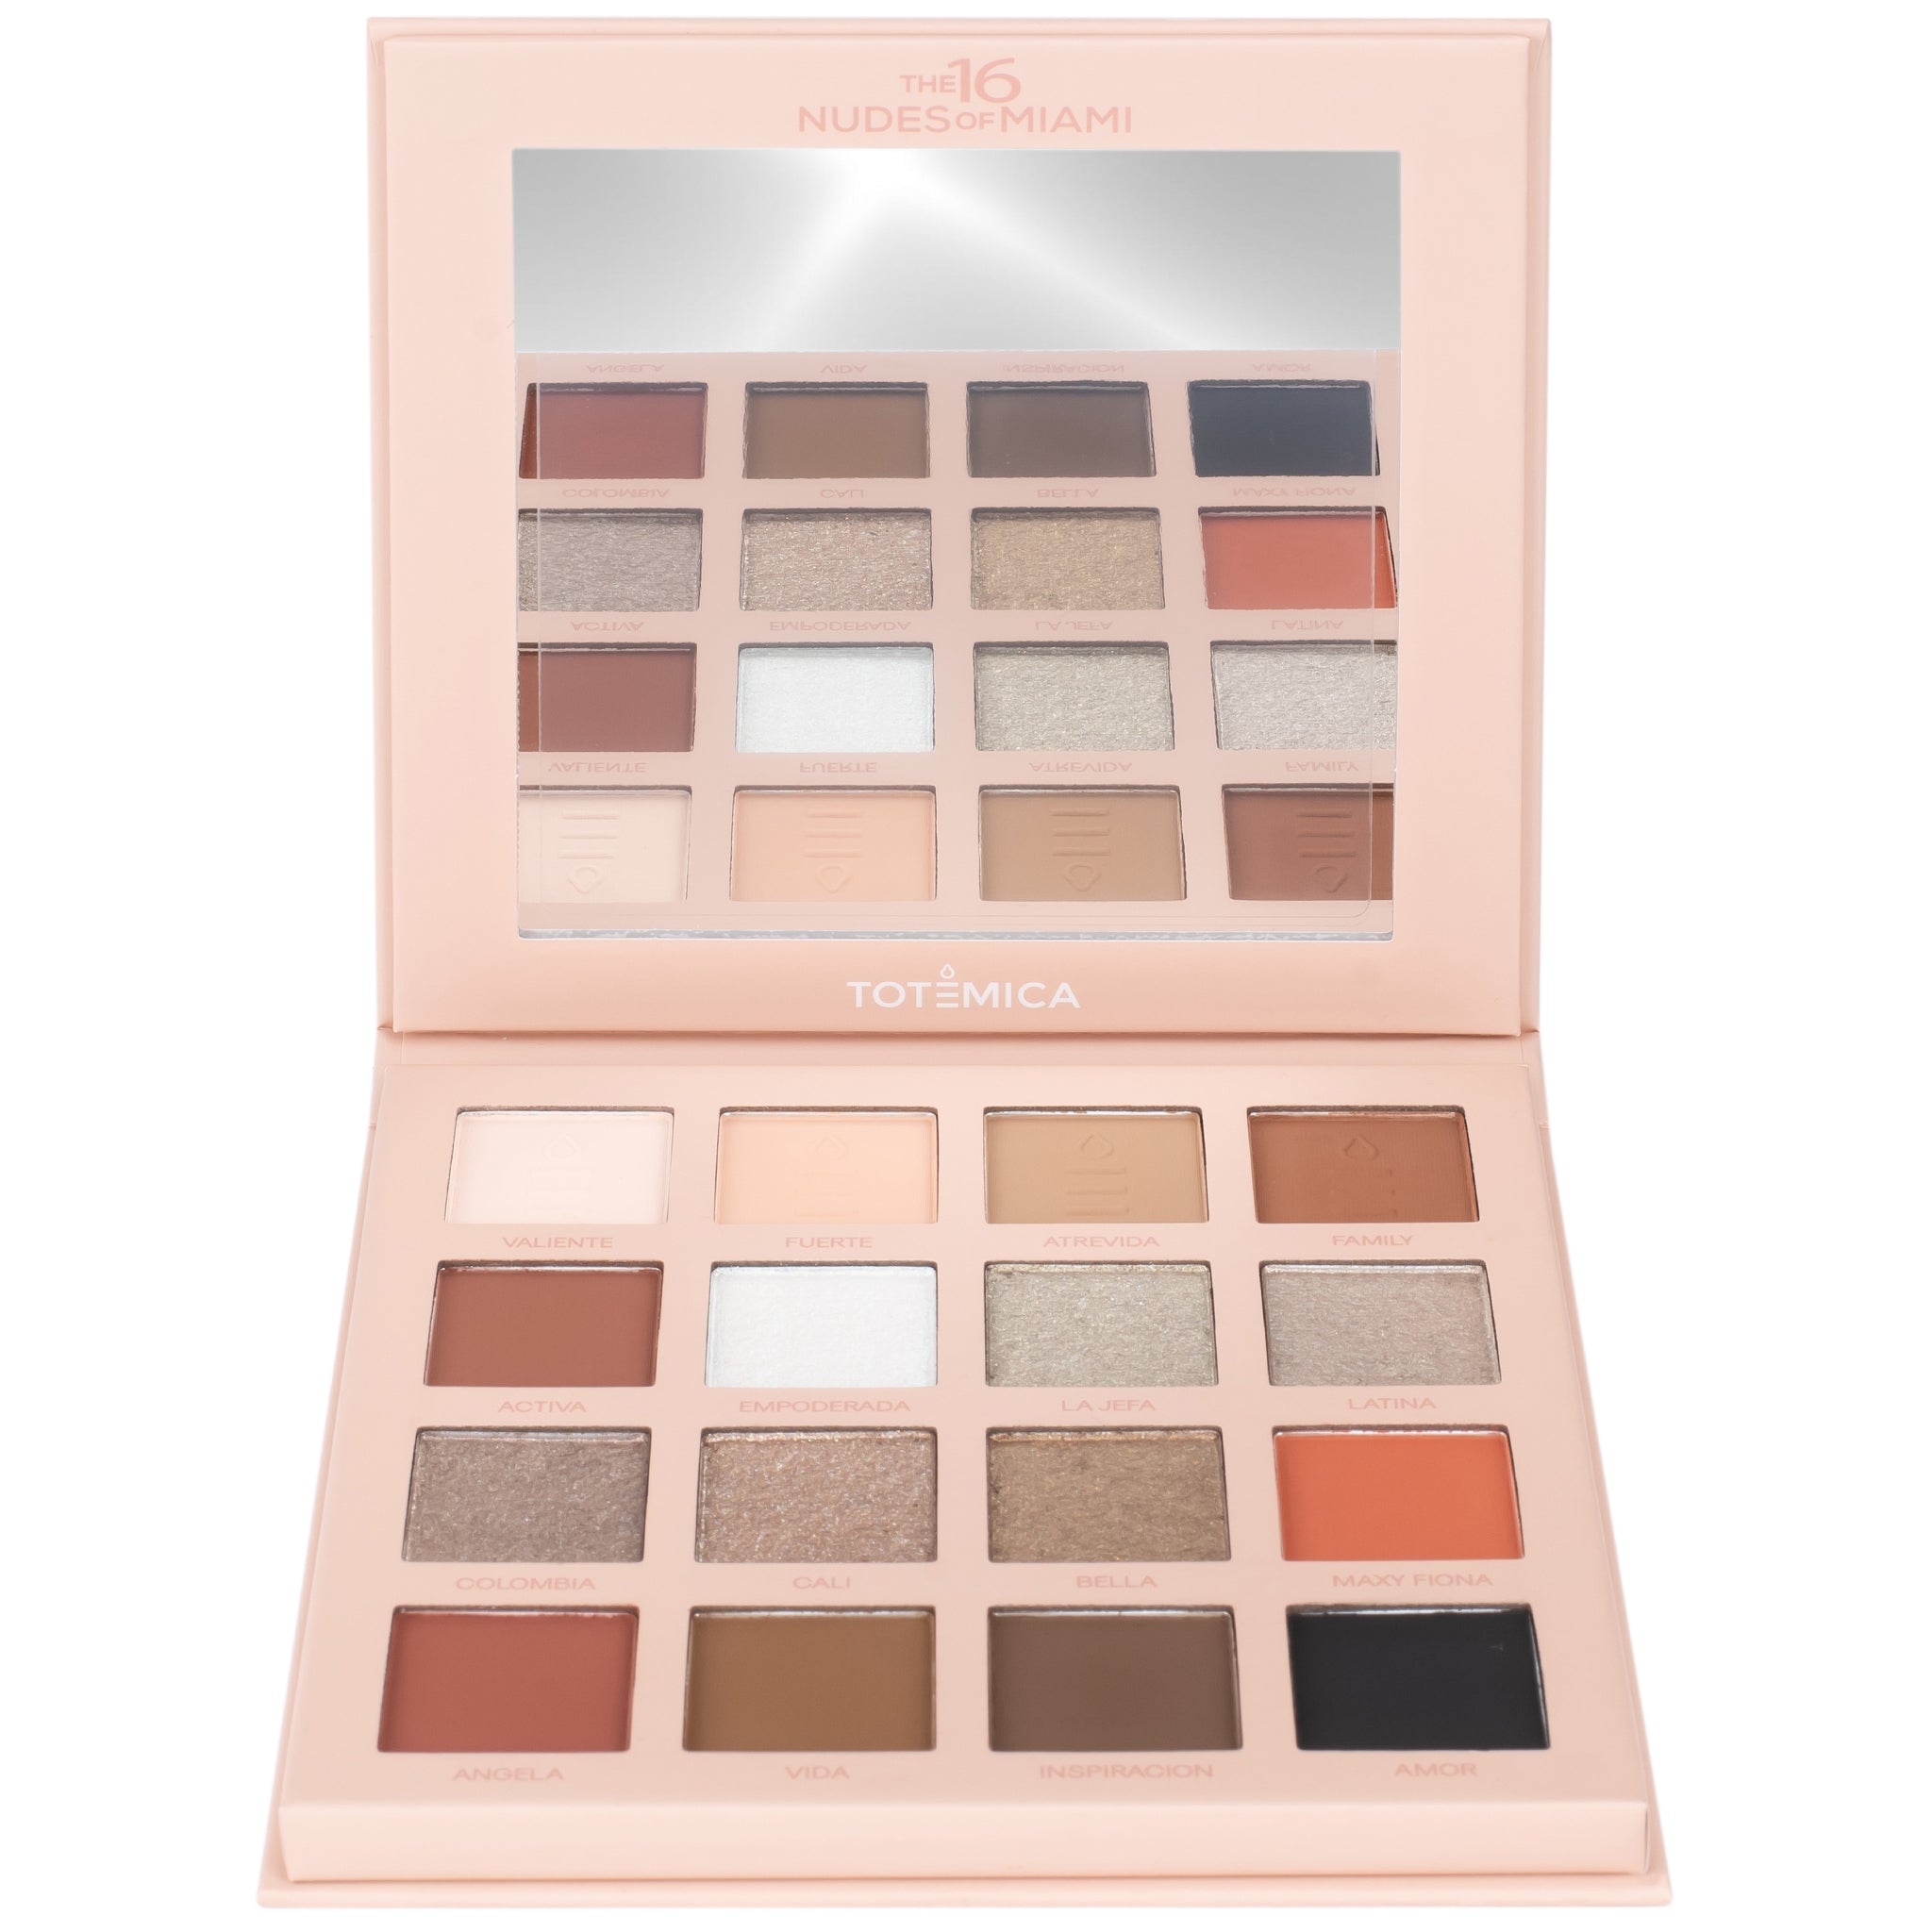 Makeup Palette Wholesale 16 Nudes The Of Totemica Miami - |